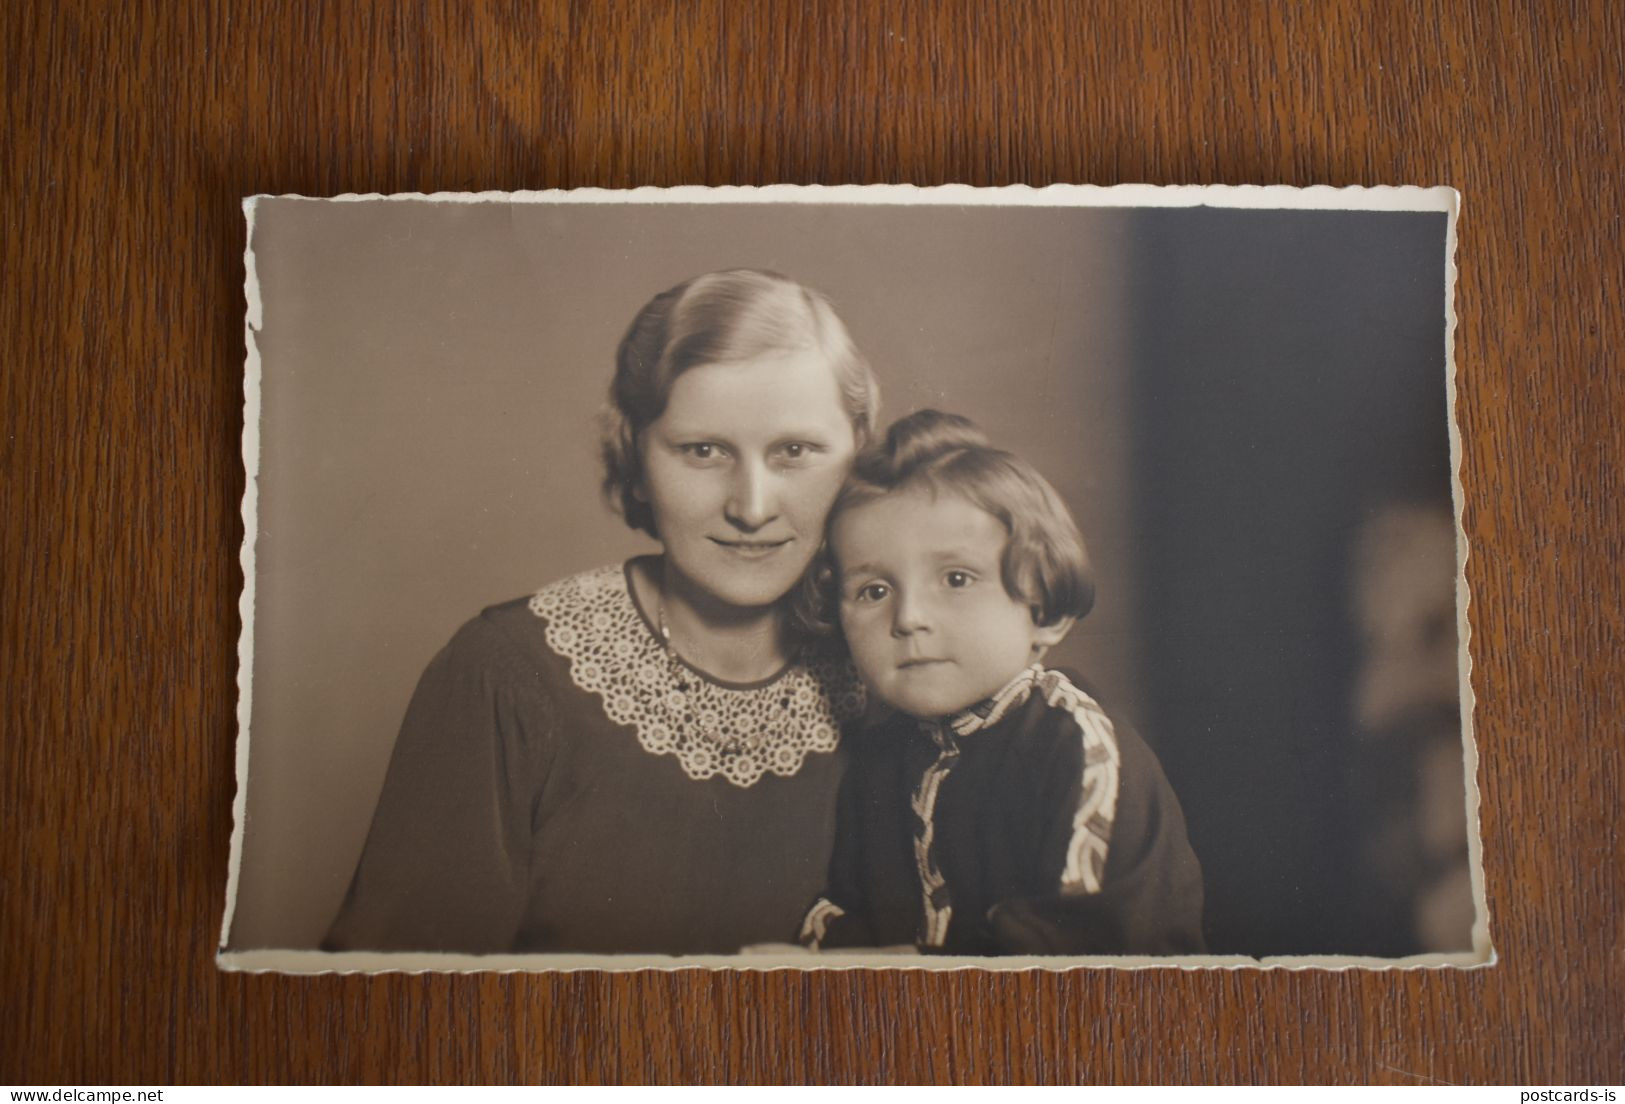 F2055 Photo Germany Mother With Daughter - Hans Schran Furth - Photographs